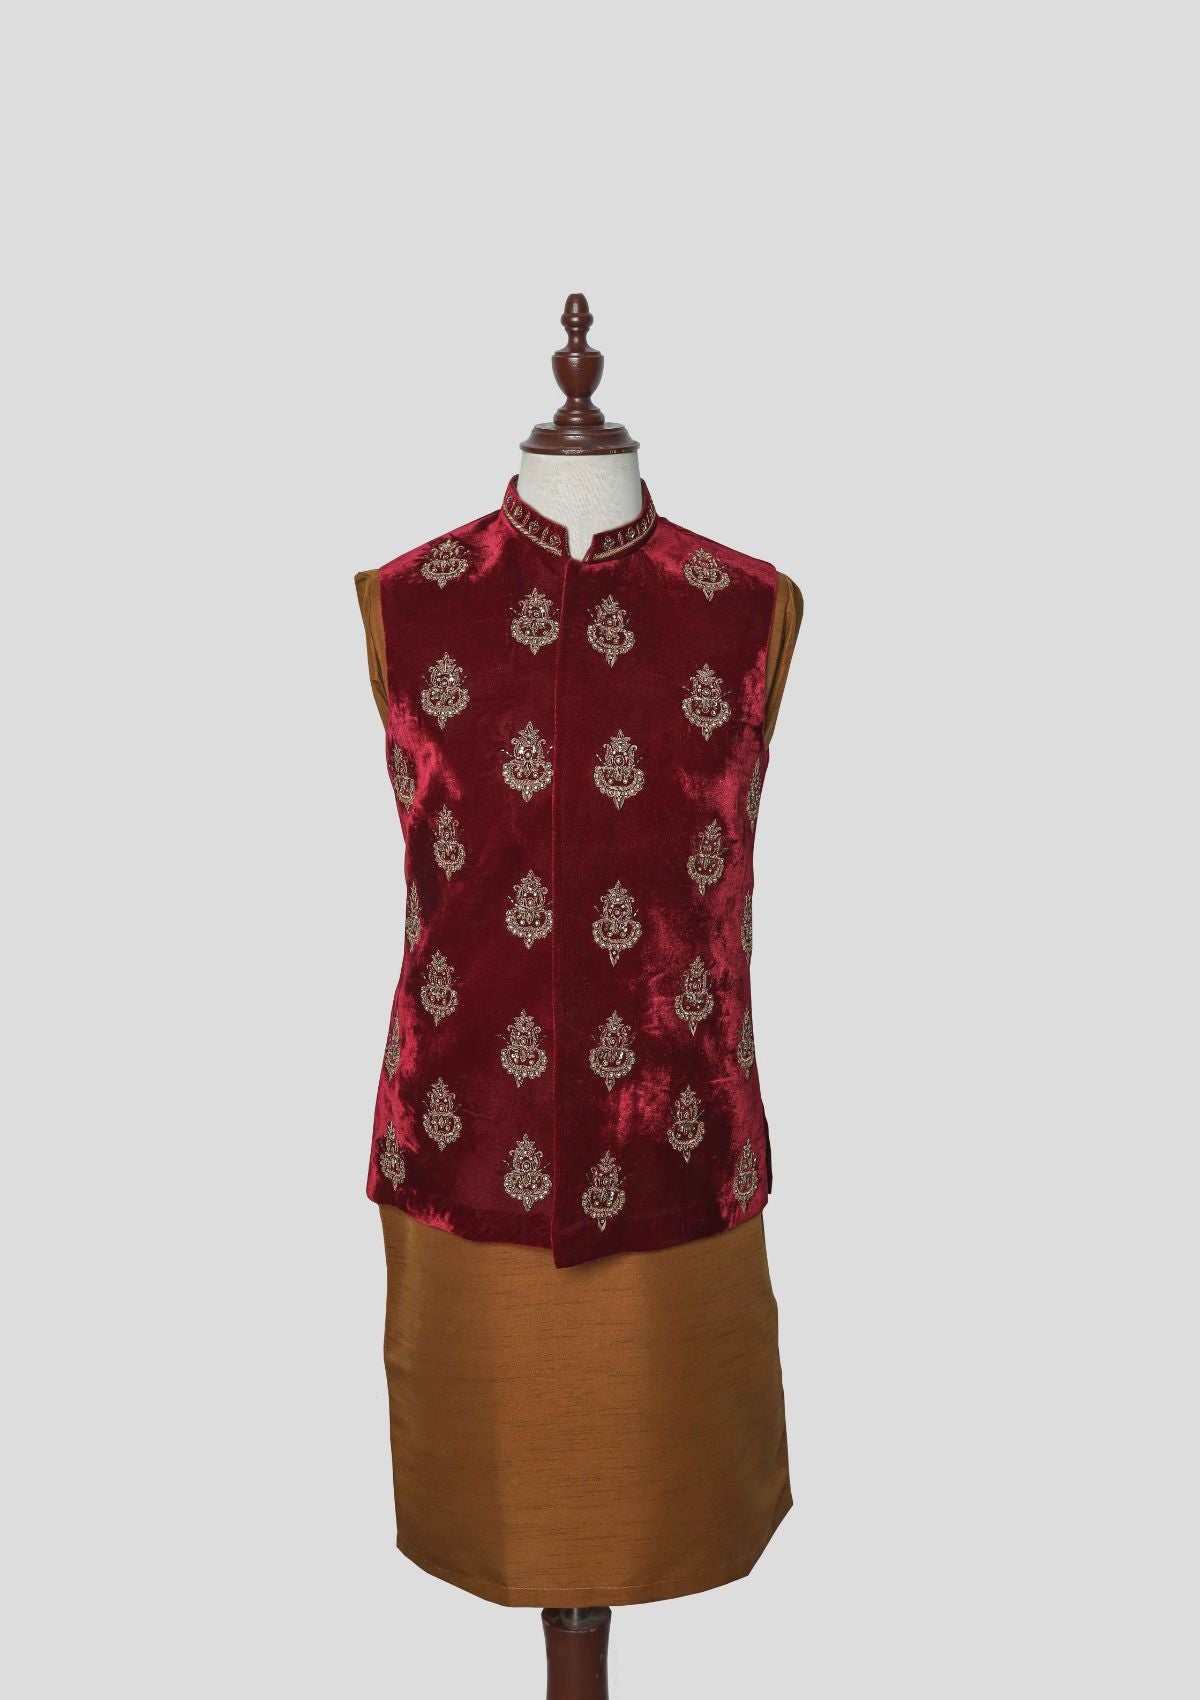 Stitched Collection - T-Mark Apparel - Waistcoat - FW - 95009